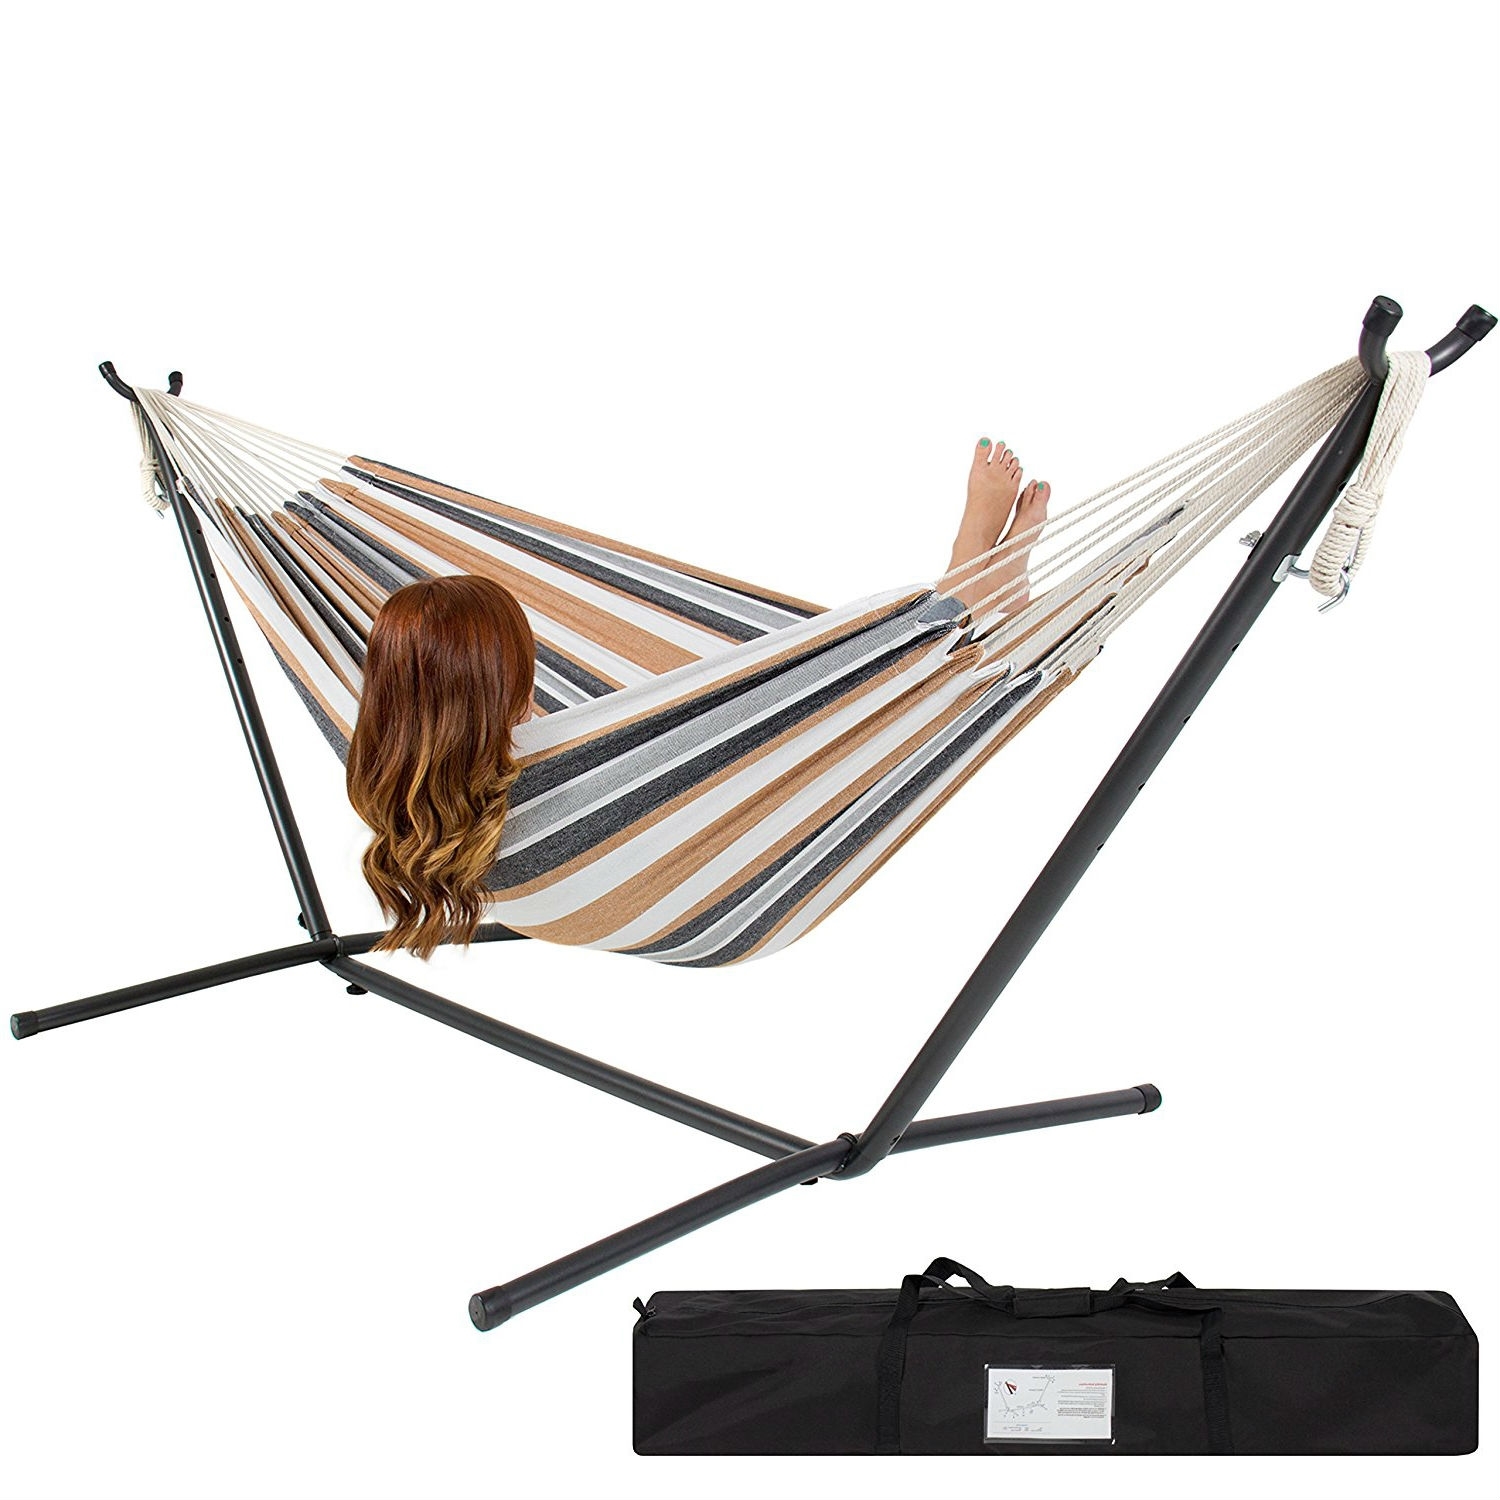 Primary image for Portable Cotton Hammock in Desert Stripe with Metal Stand and Carry Case